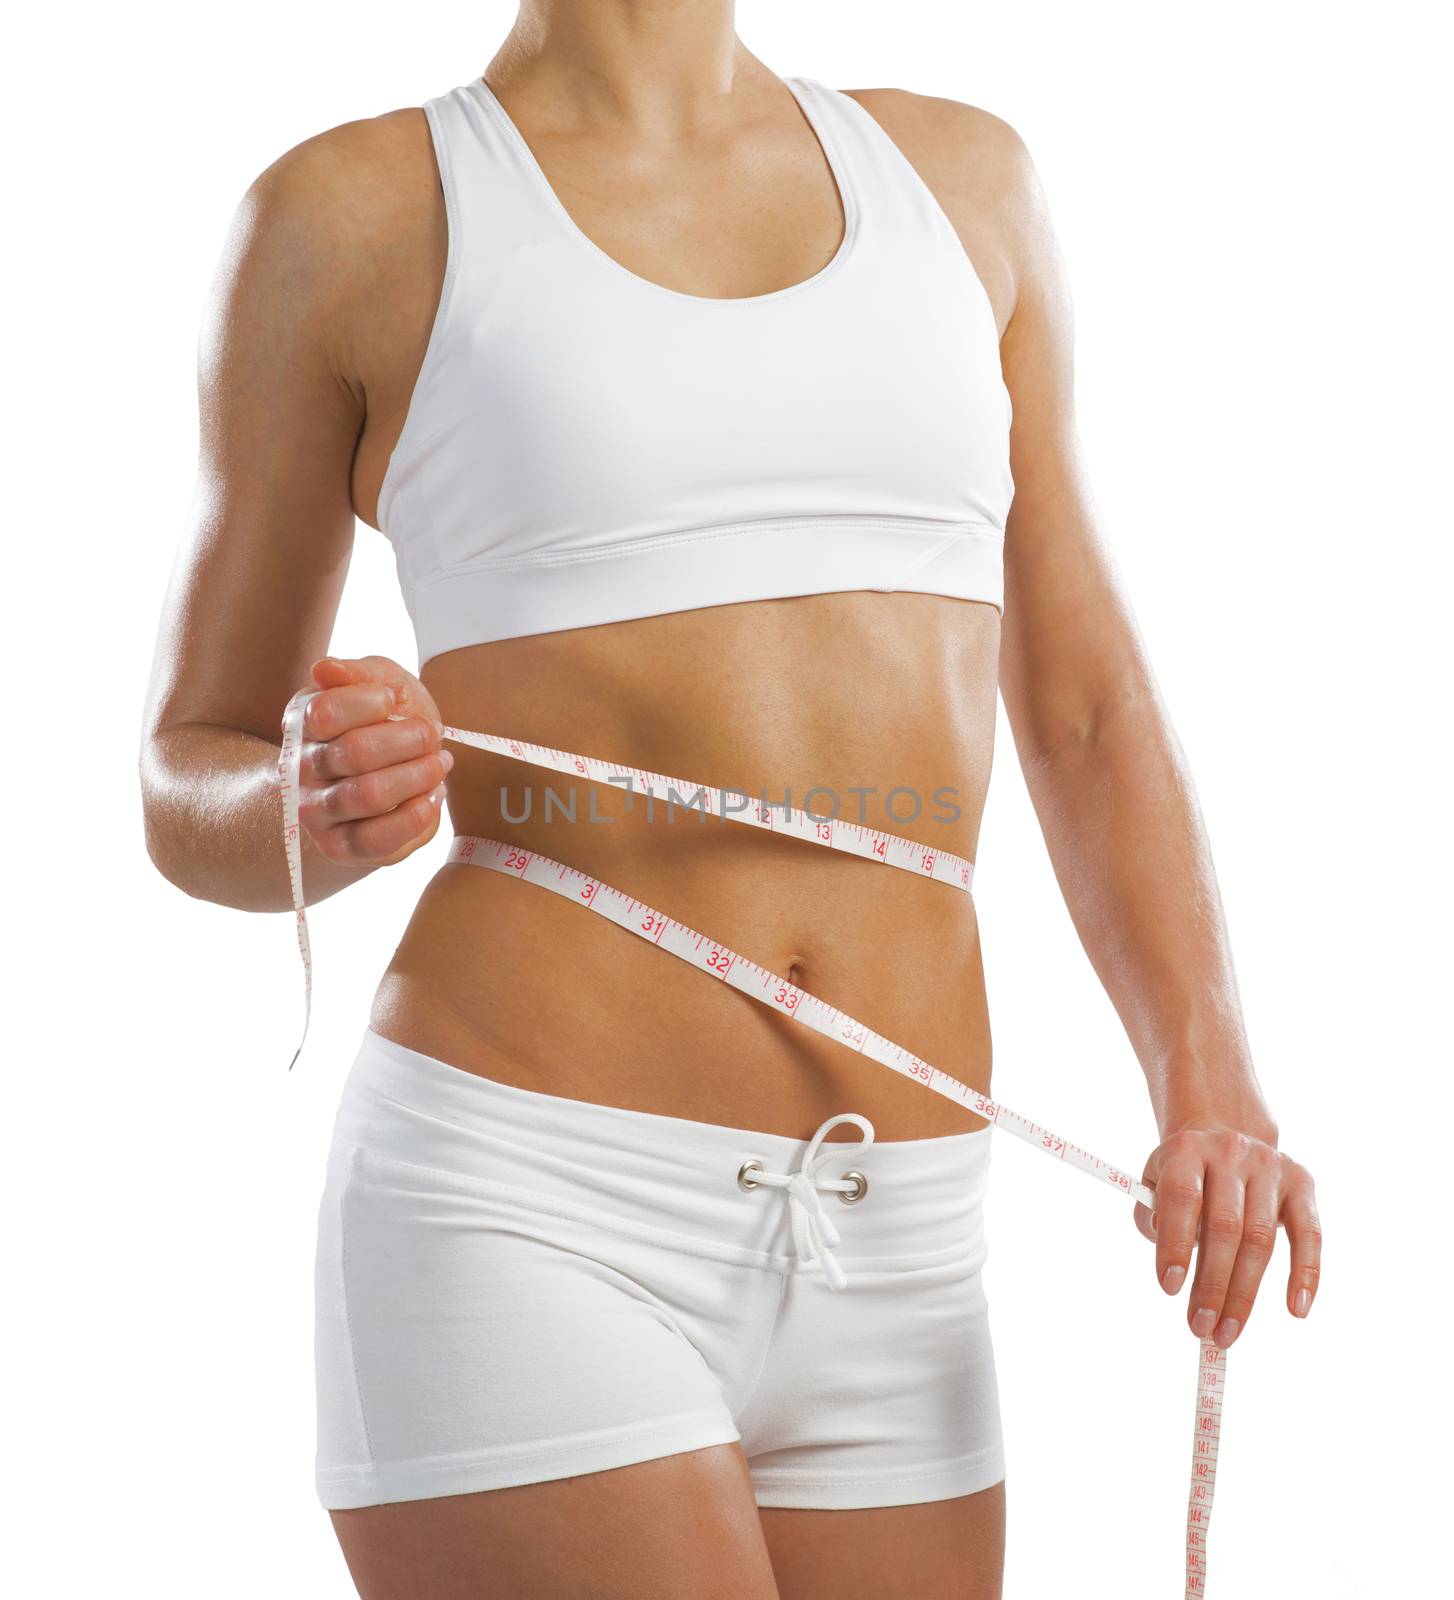 young athletic woman measuring waist measuring tape, isolated on white background